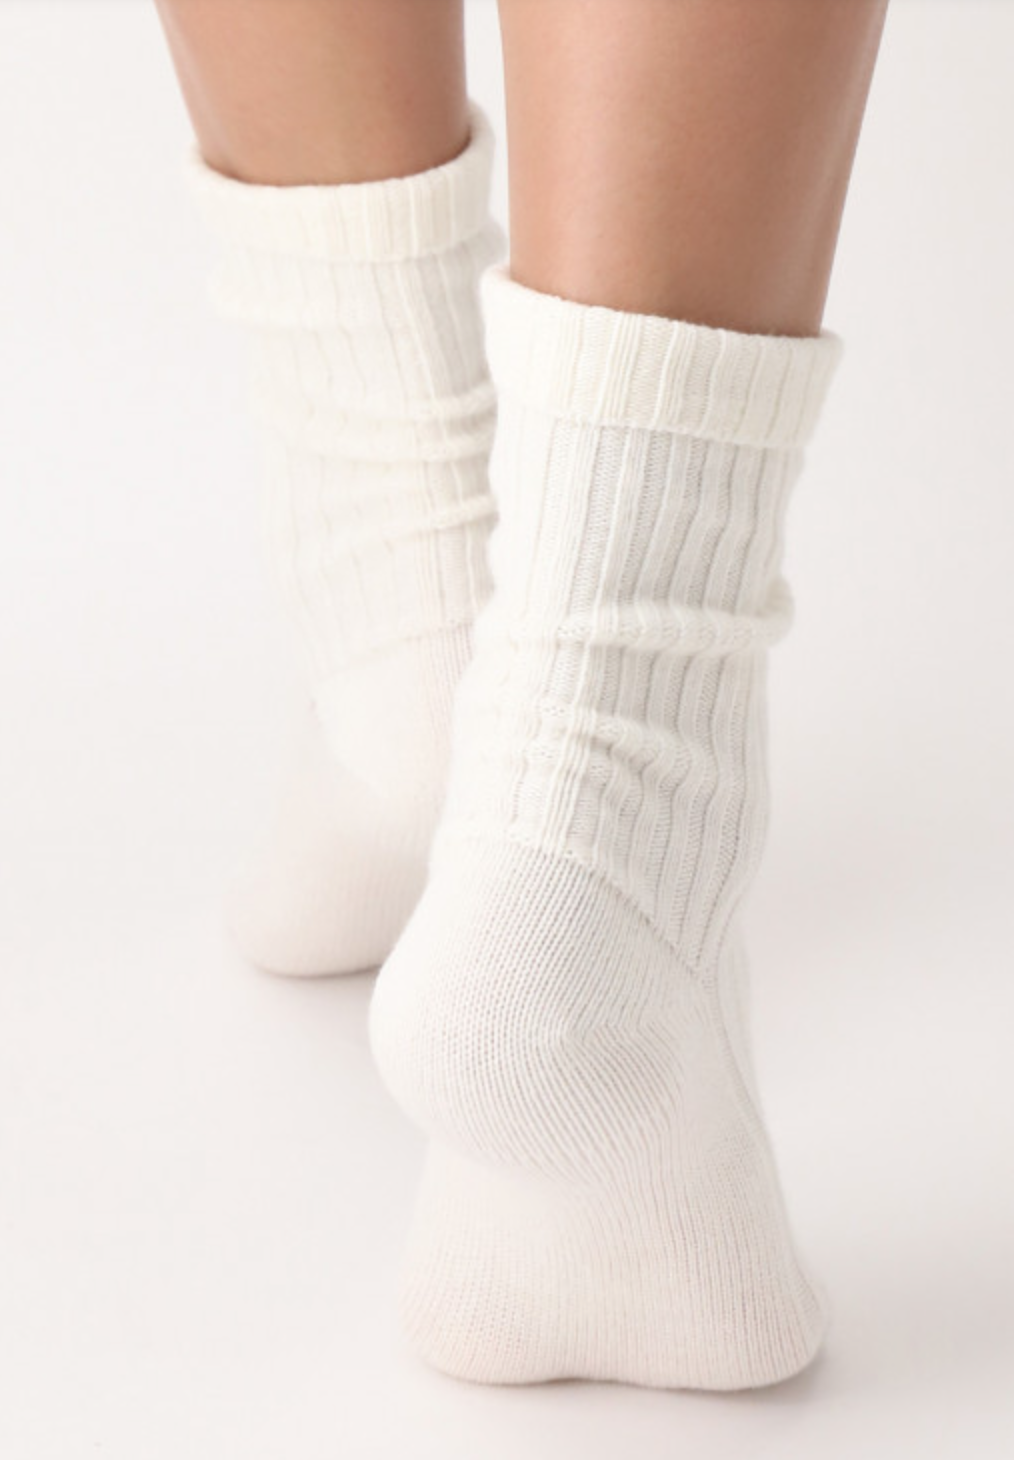 OroblÌ_ All Colors Bootie Sock - Ivory cream soft ribbed knitted cotton ankle socks with plain sole, shaped heel and turn down cuff.